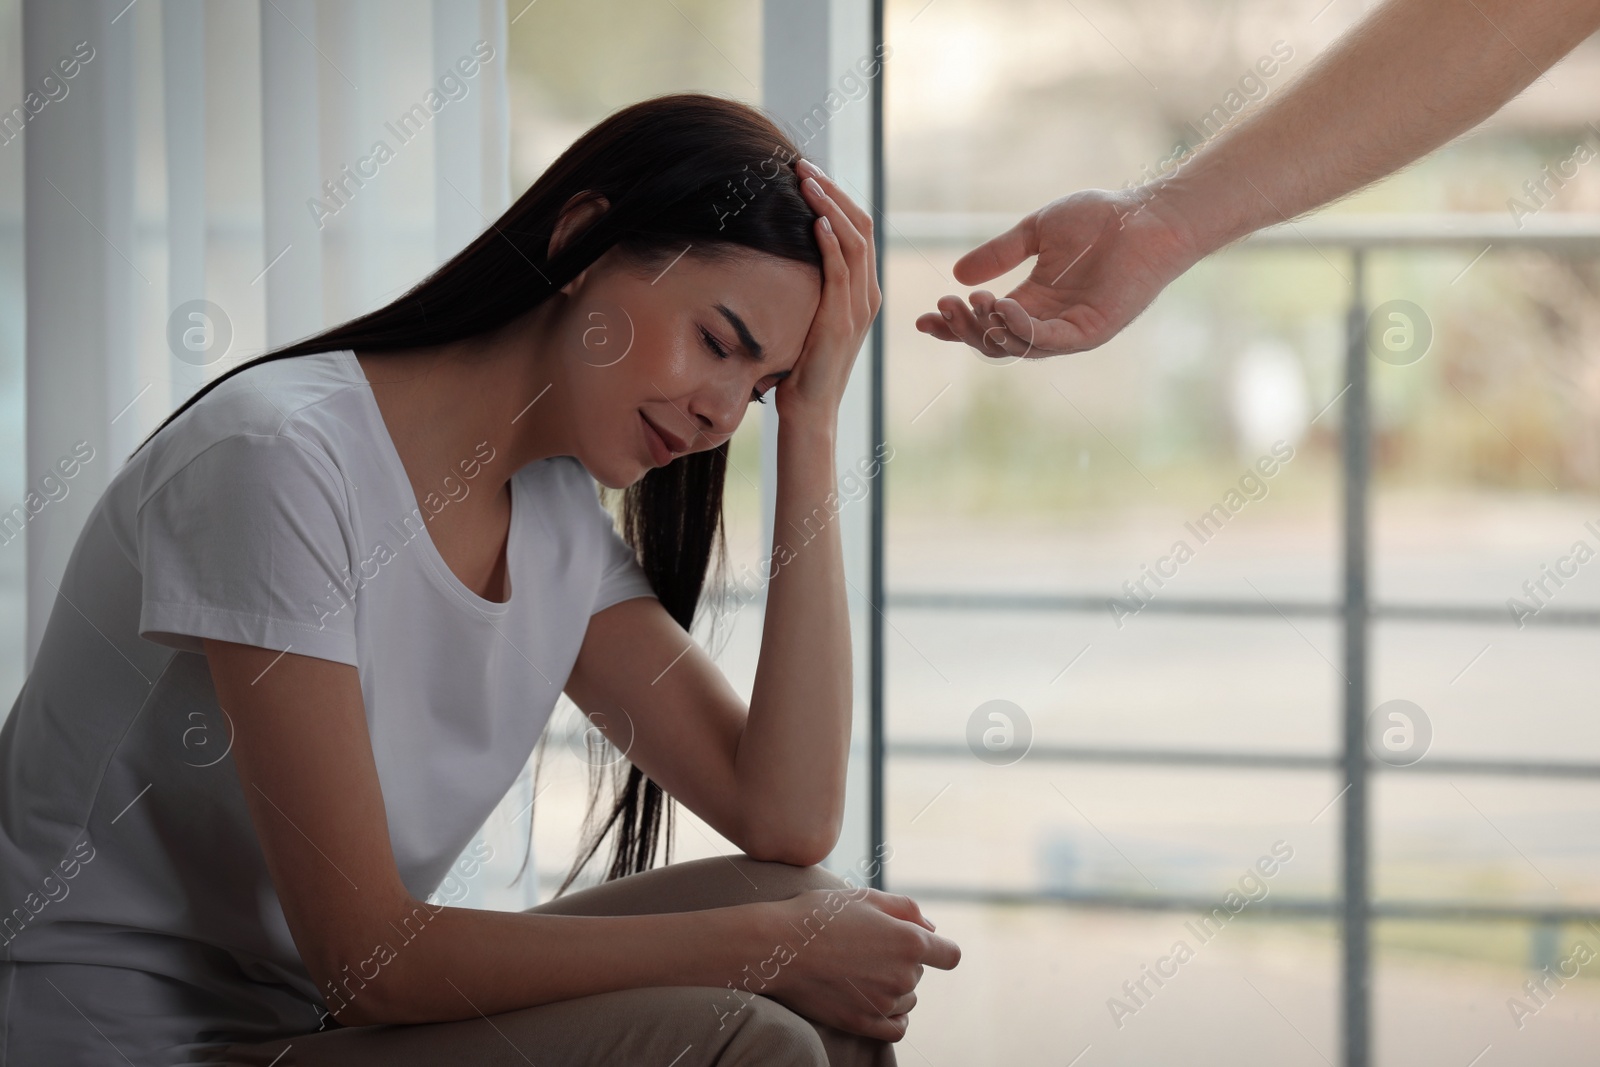 Photo of Man offering hand to depressed woman indoors